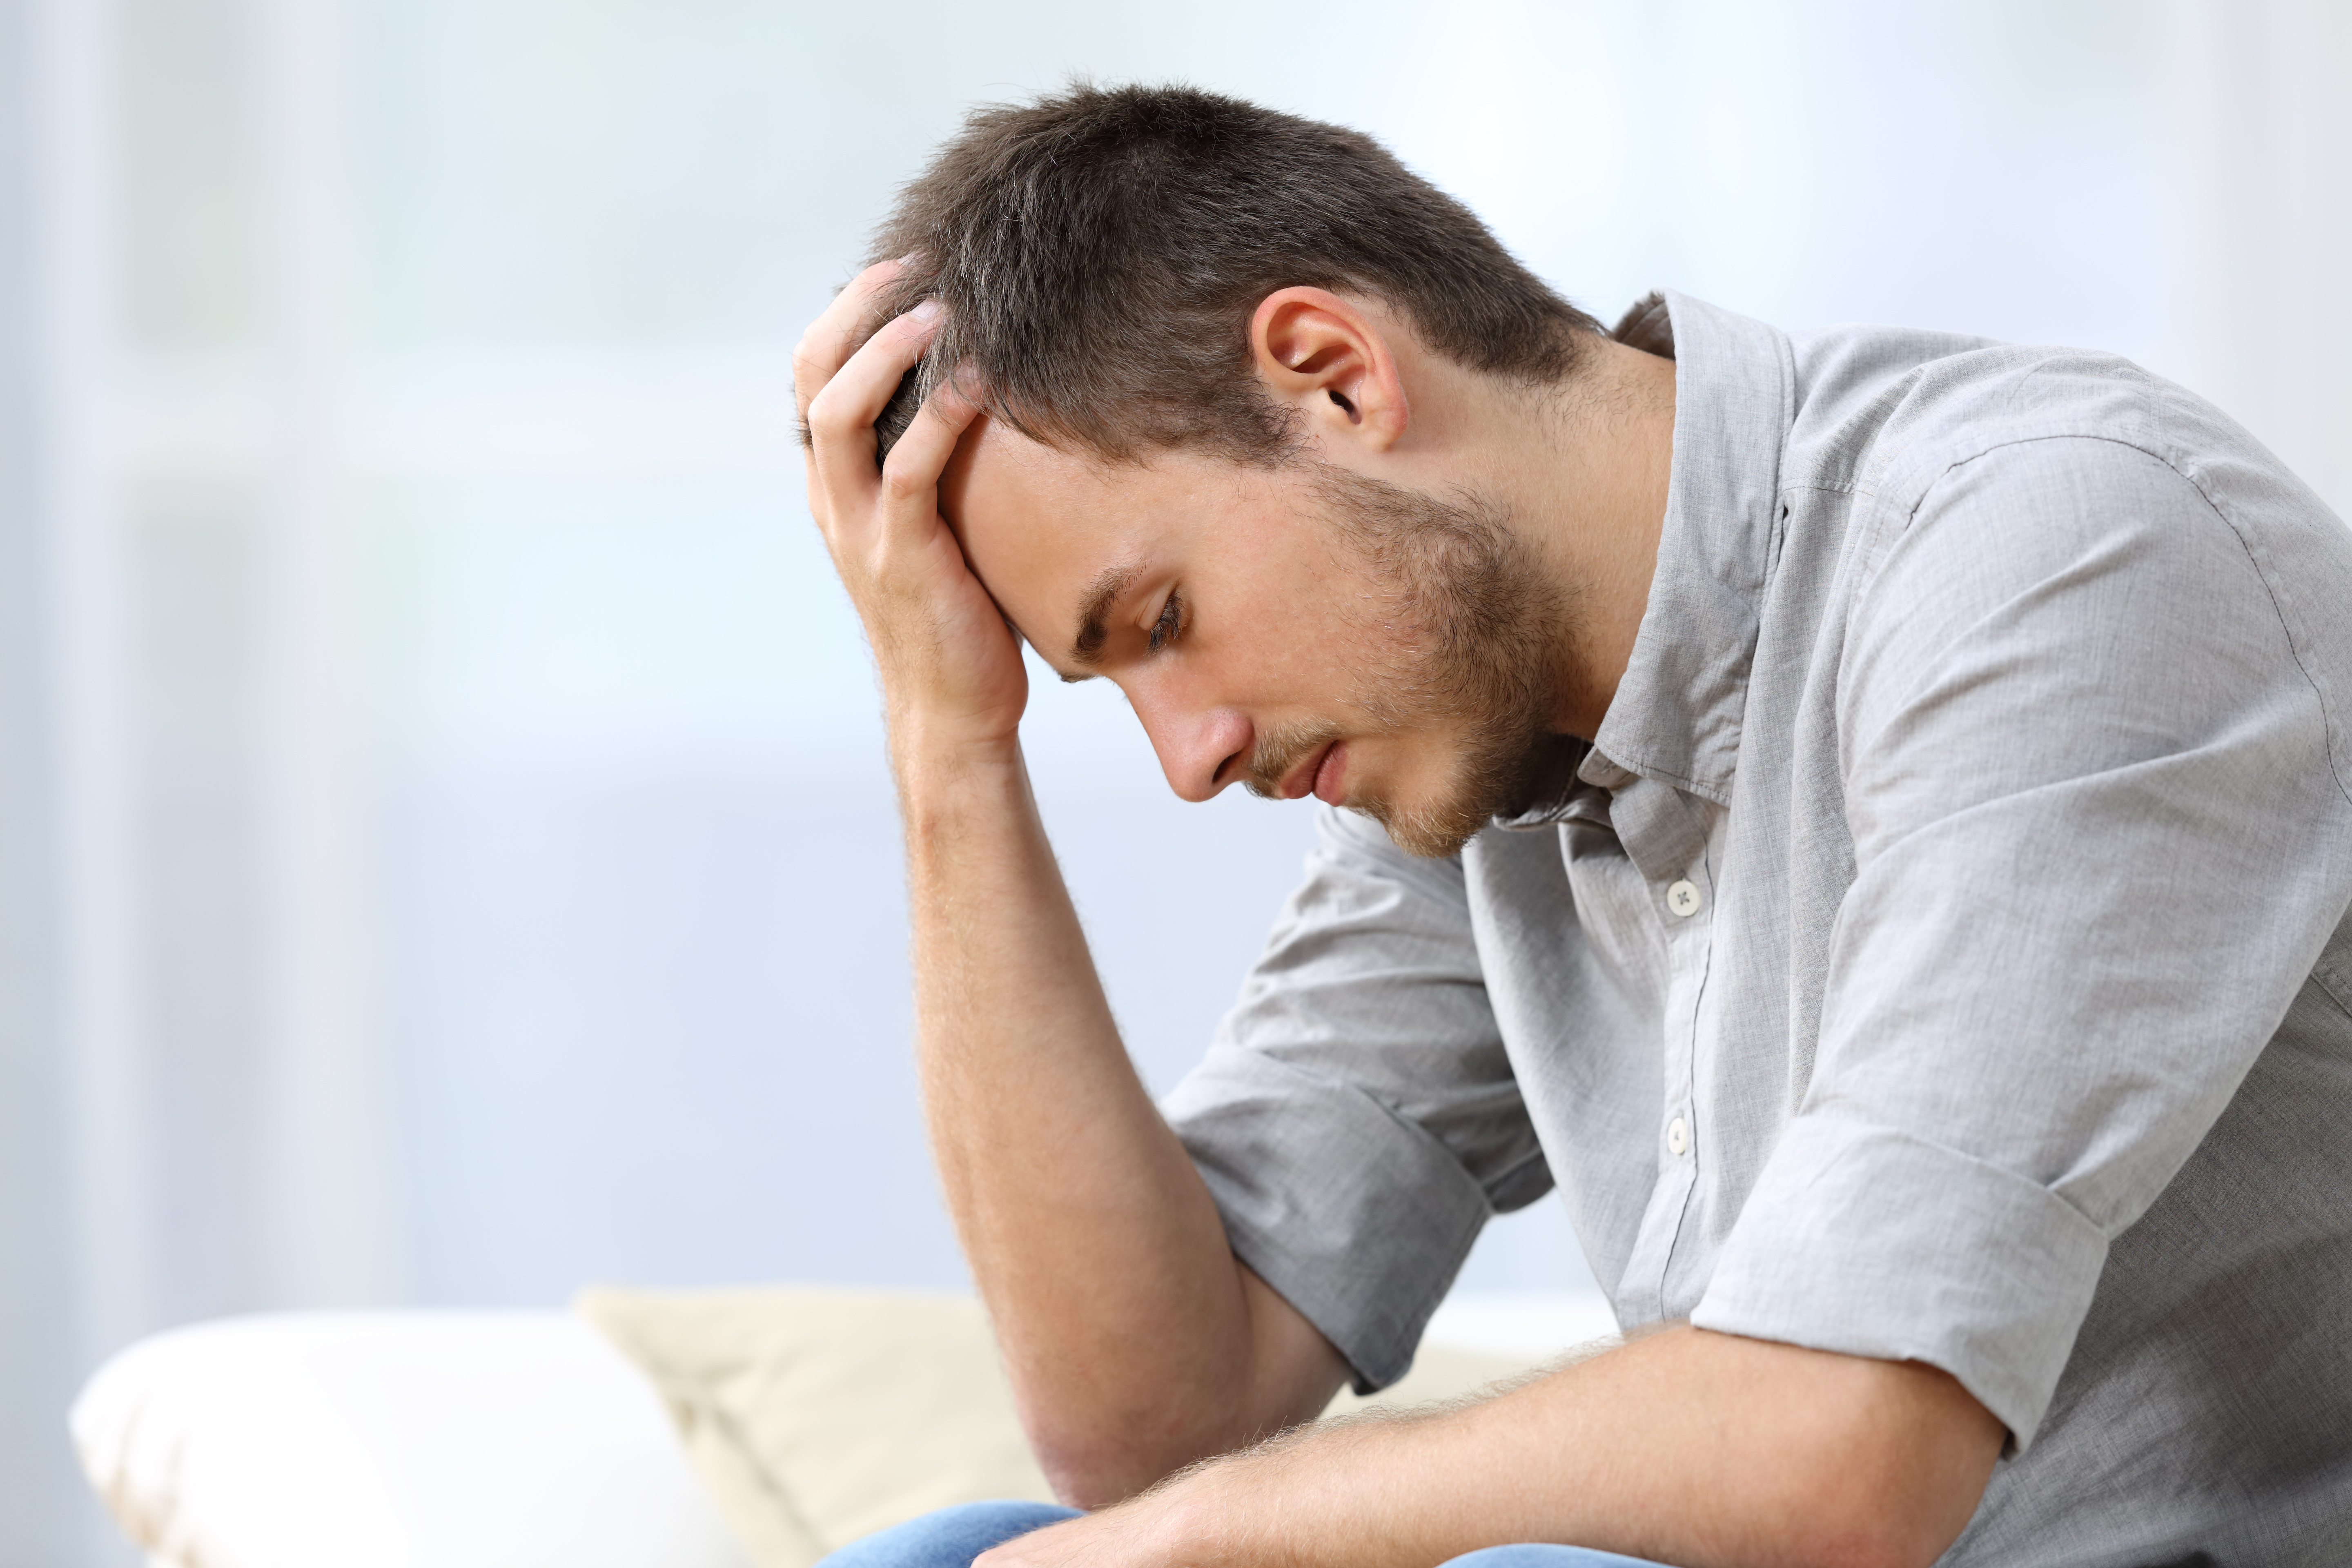 A man with his head bowed down in worry | Source: Shutterstock